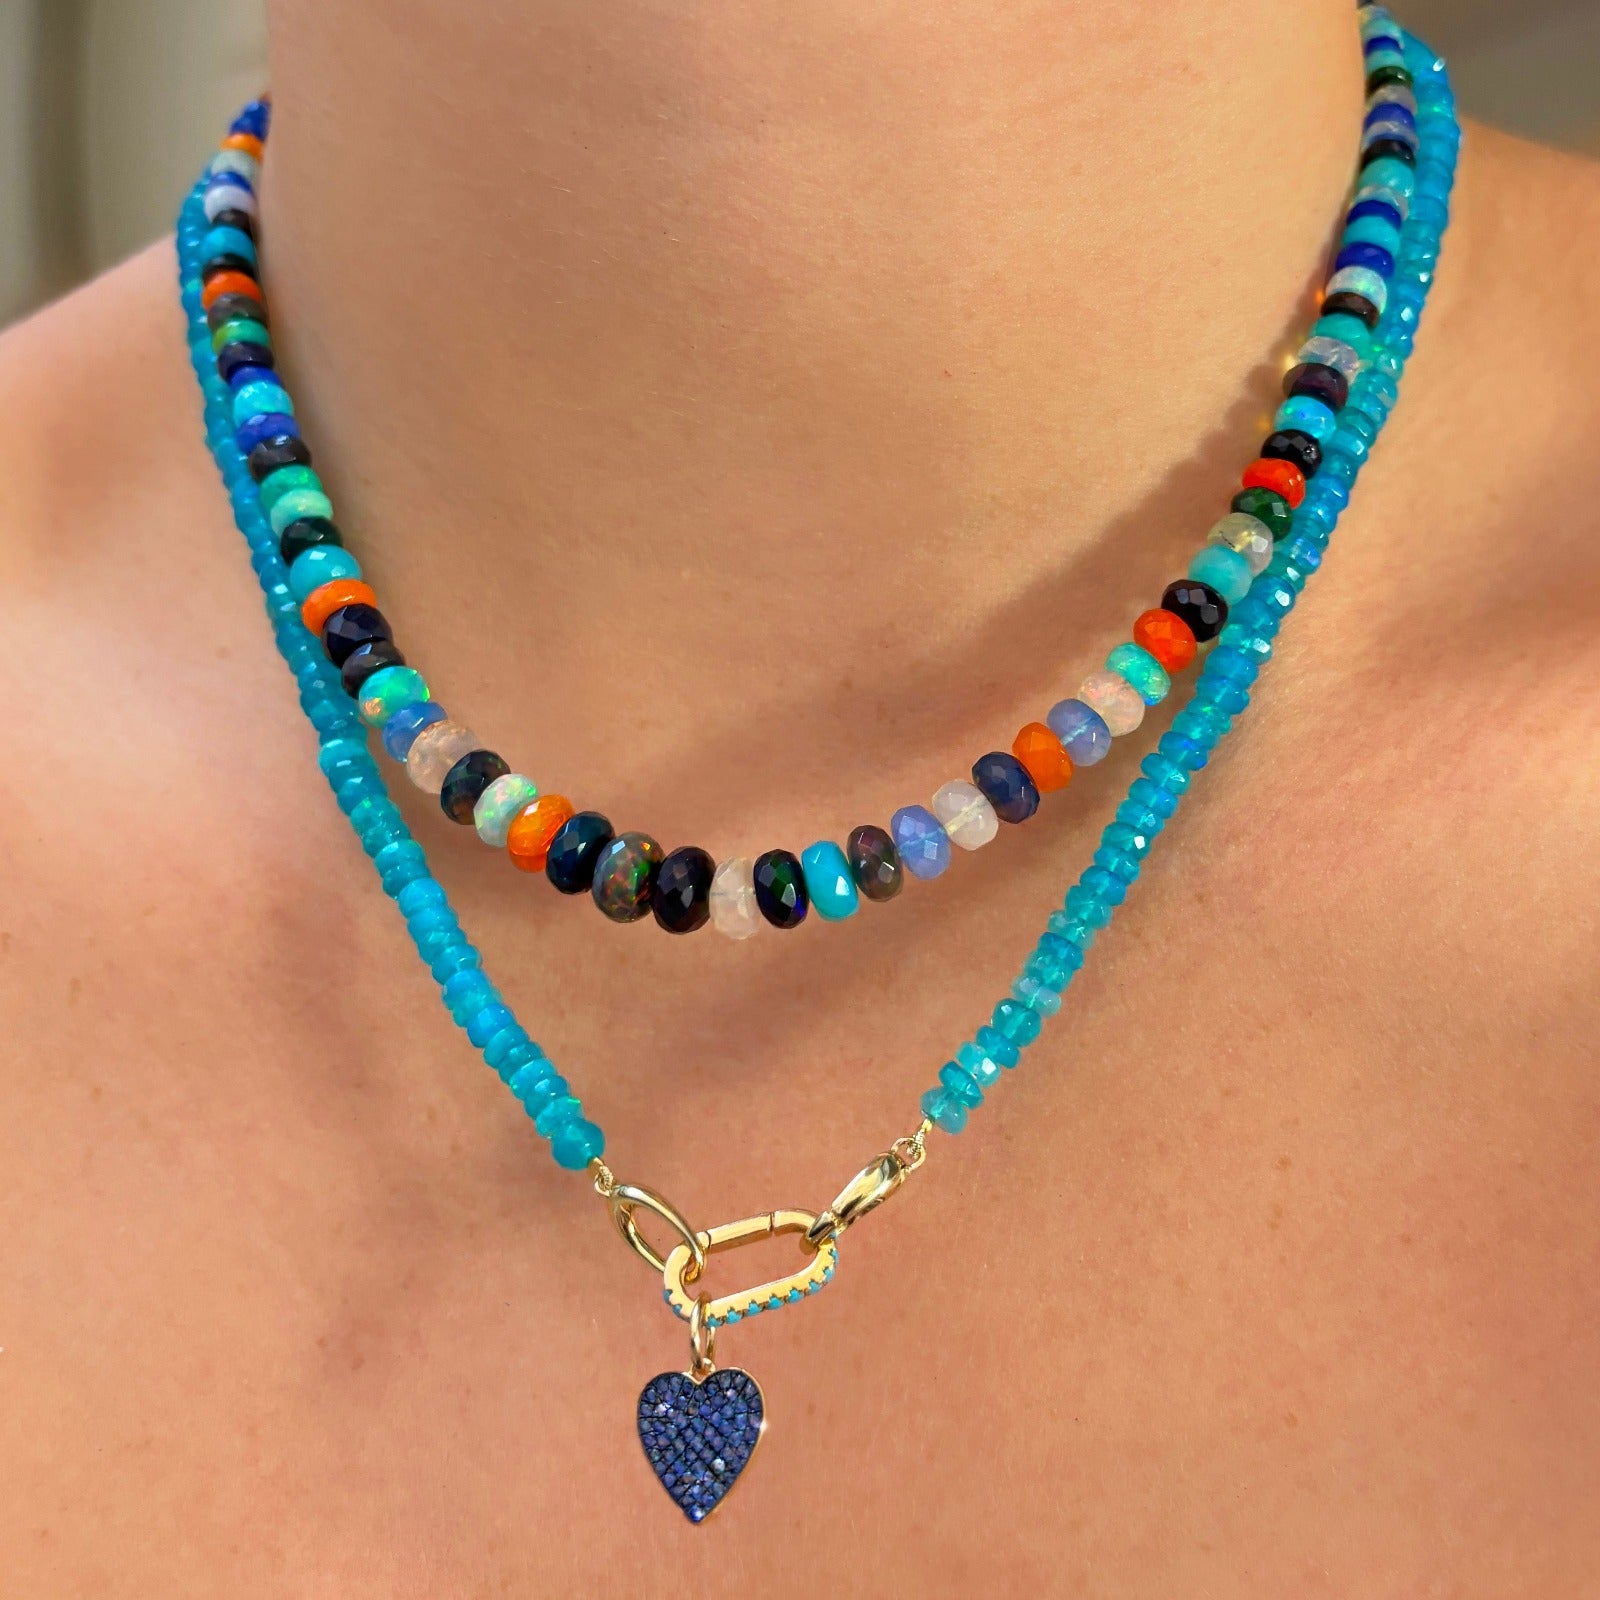 Shimmering beaded necklace made of faceted opals in shades of bright light blue on a gold linking ovals clasp. Styled on a neck layered with a small turquoise charm and medium pave sapphire heart charm.